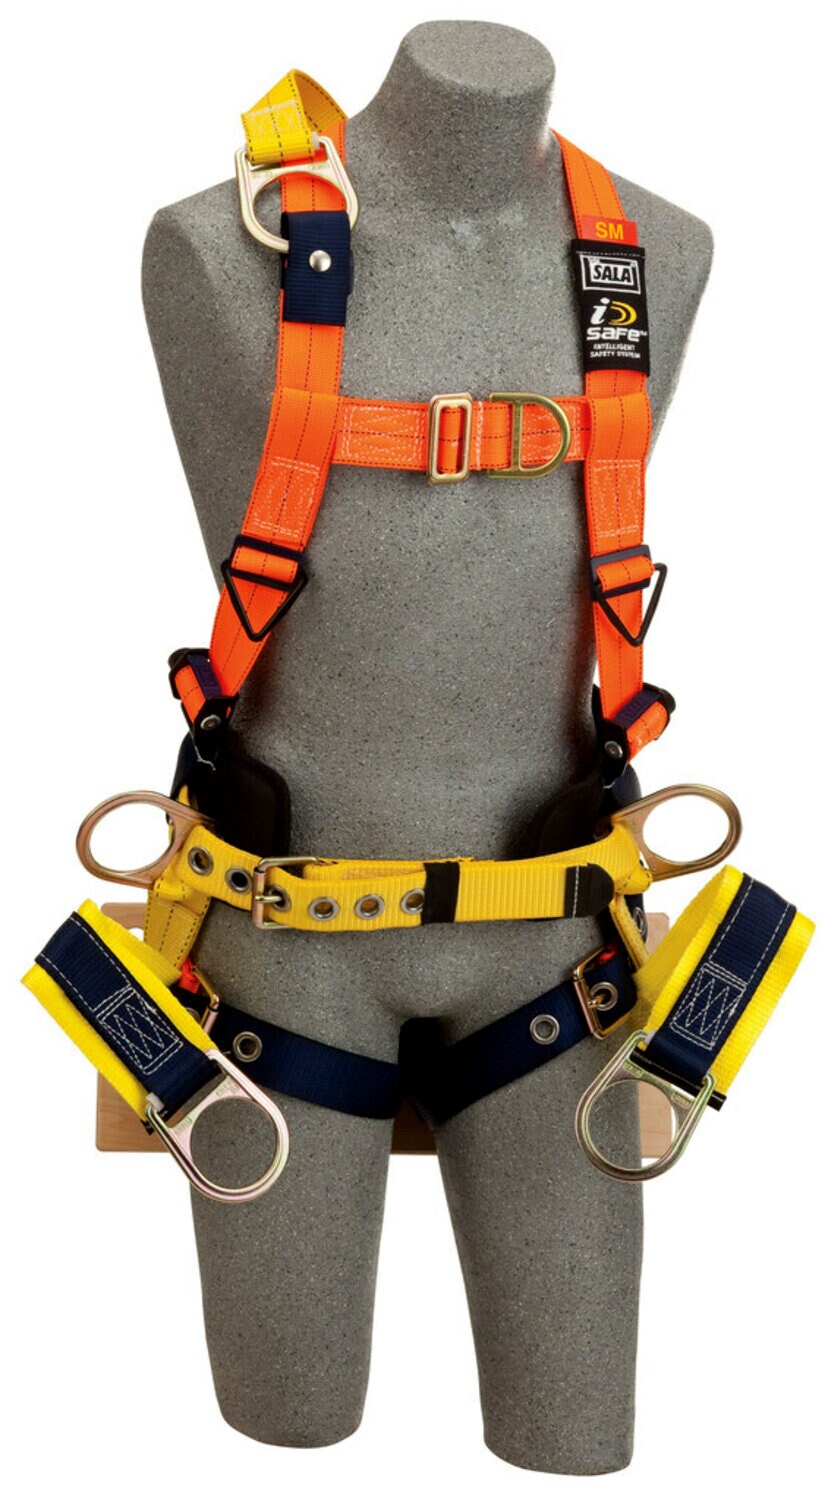 7012815649 - 3M DBI-SALA Delta Oil and Gas Climbing/Positioning/Suspension Safety Harness with Board Seat 1108128, Hi-Vis Orange, X-Large